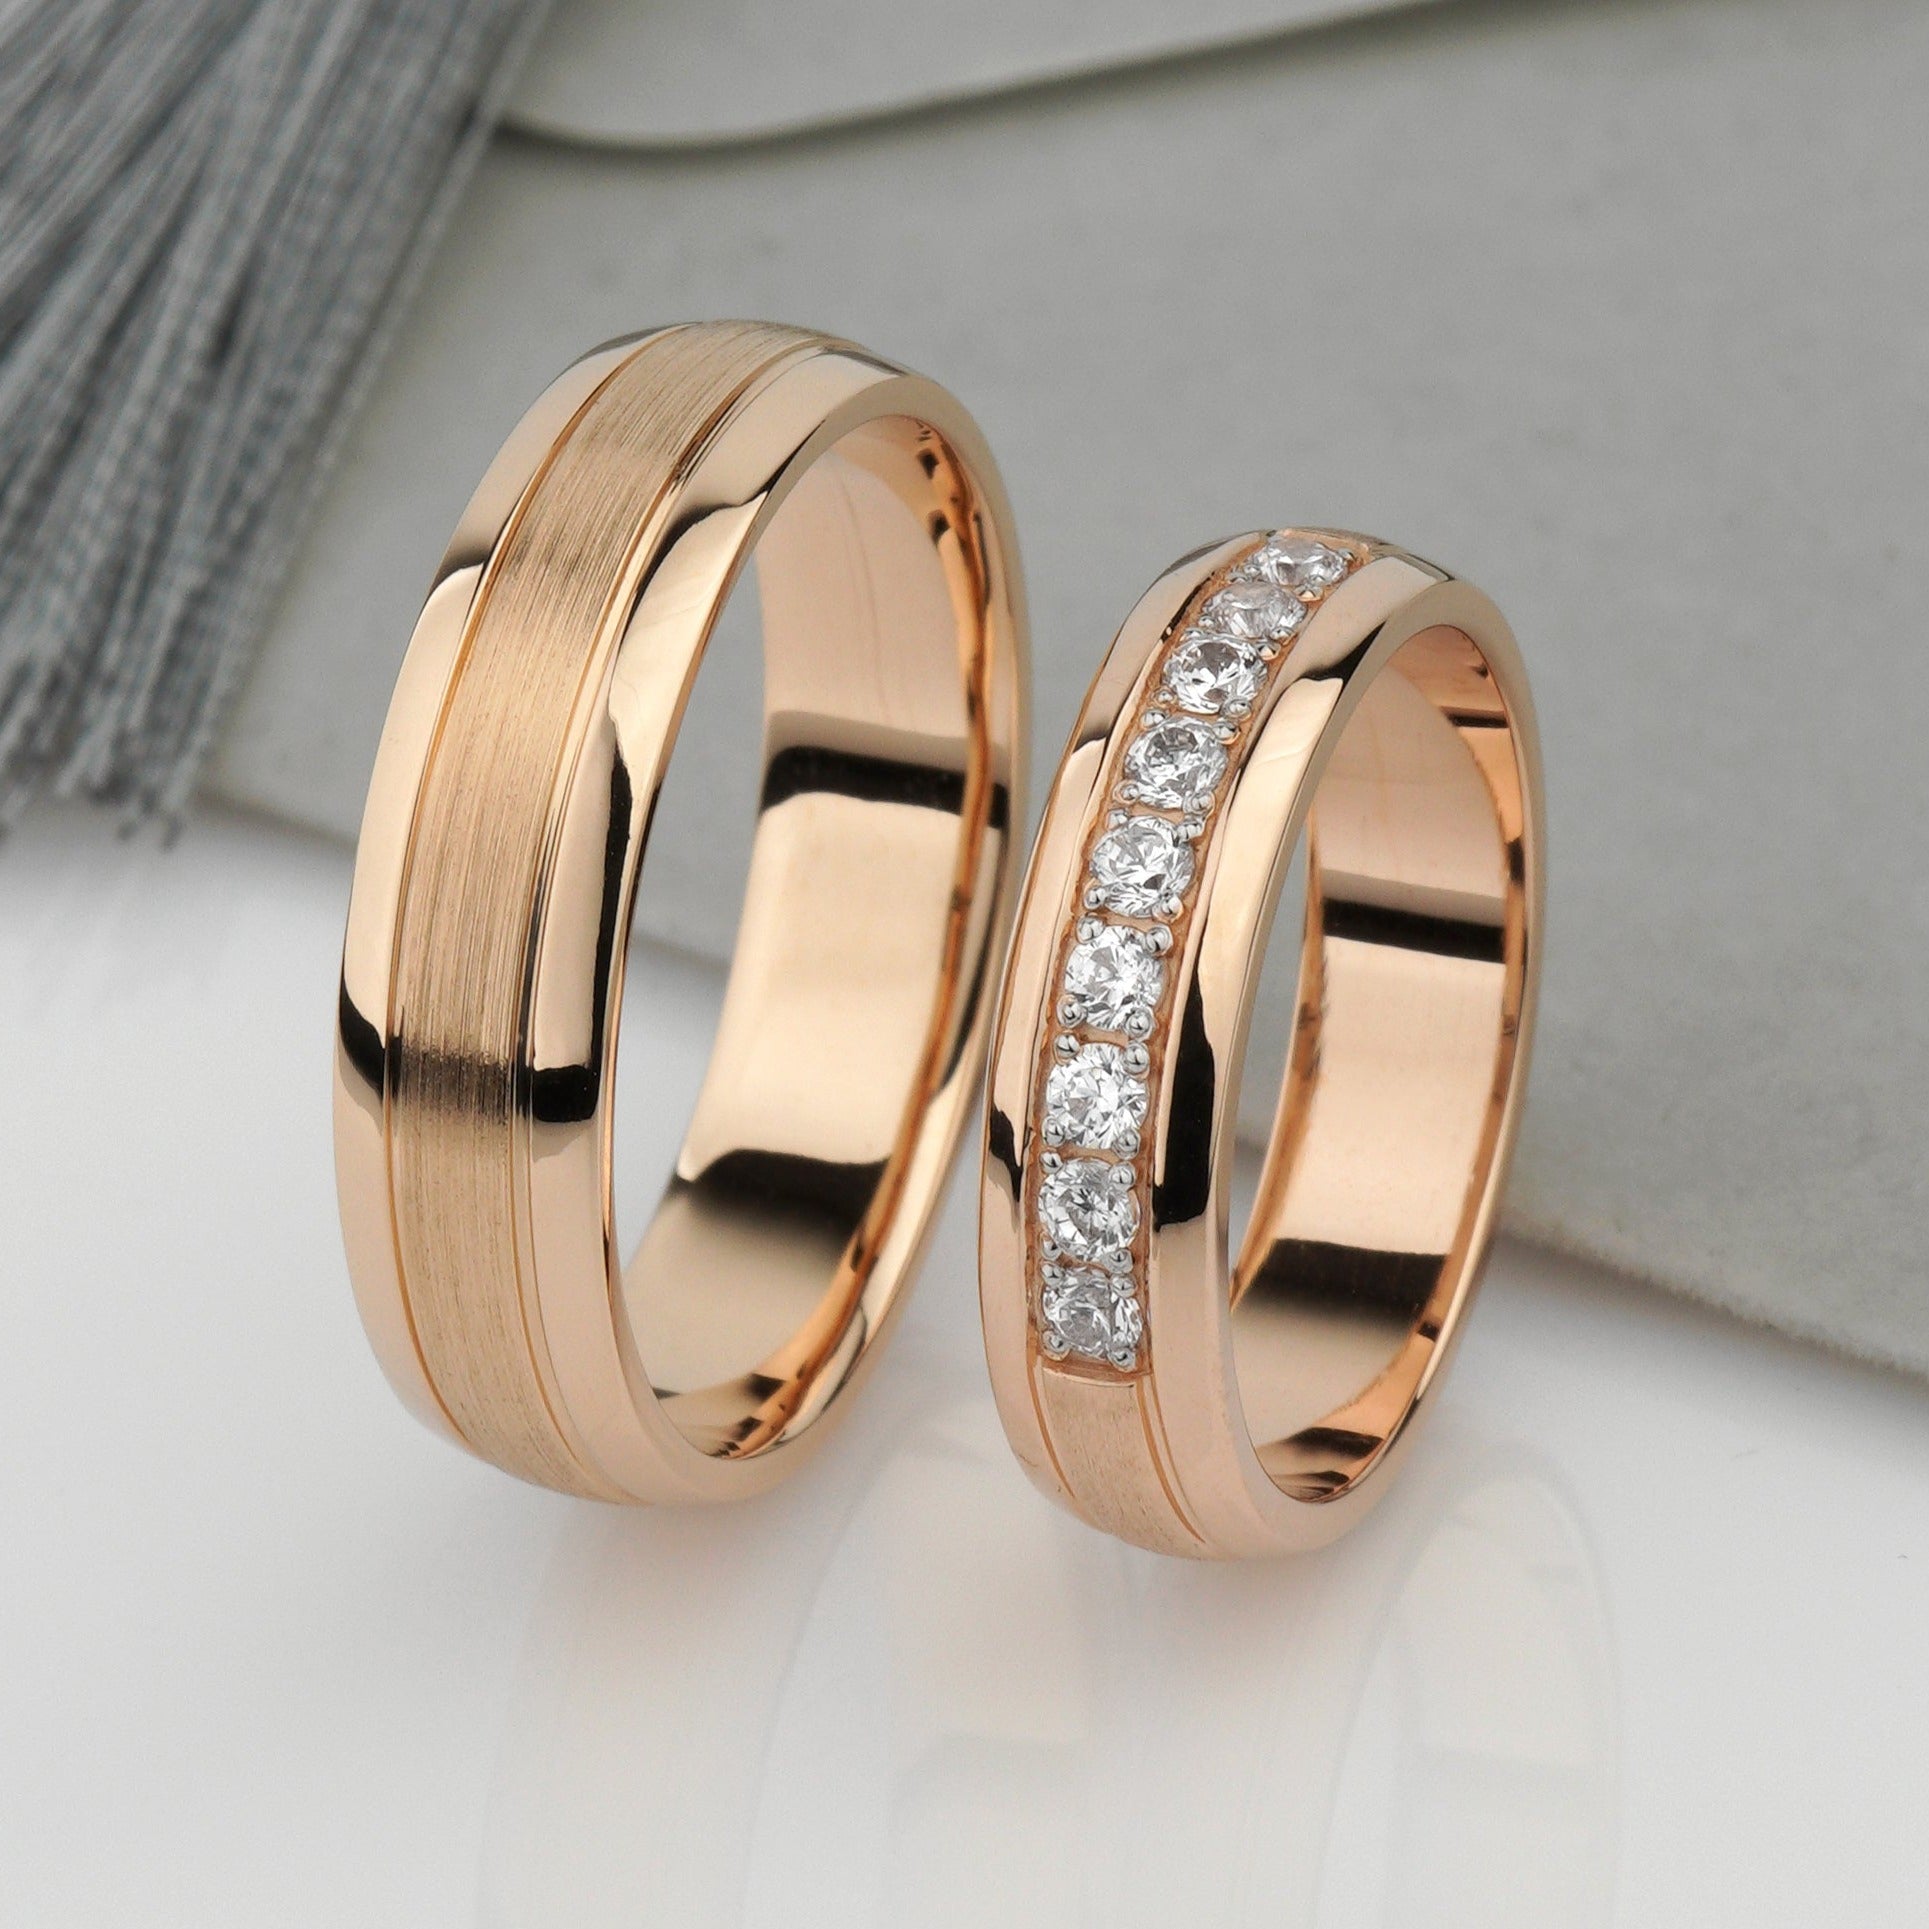 Wedding bands set his and hers. Couples wedding bands. Diamond wedding band. Unique matching wedding bands. His and hers wedding bands. Diamond wedding rings. Classic wedding rings set. Unique wedding bands.Rose gold wedding ring set